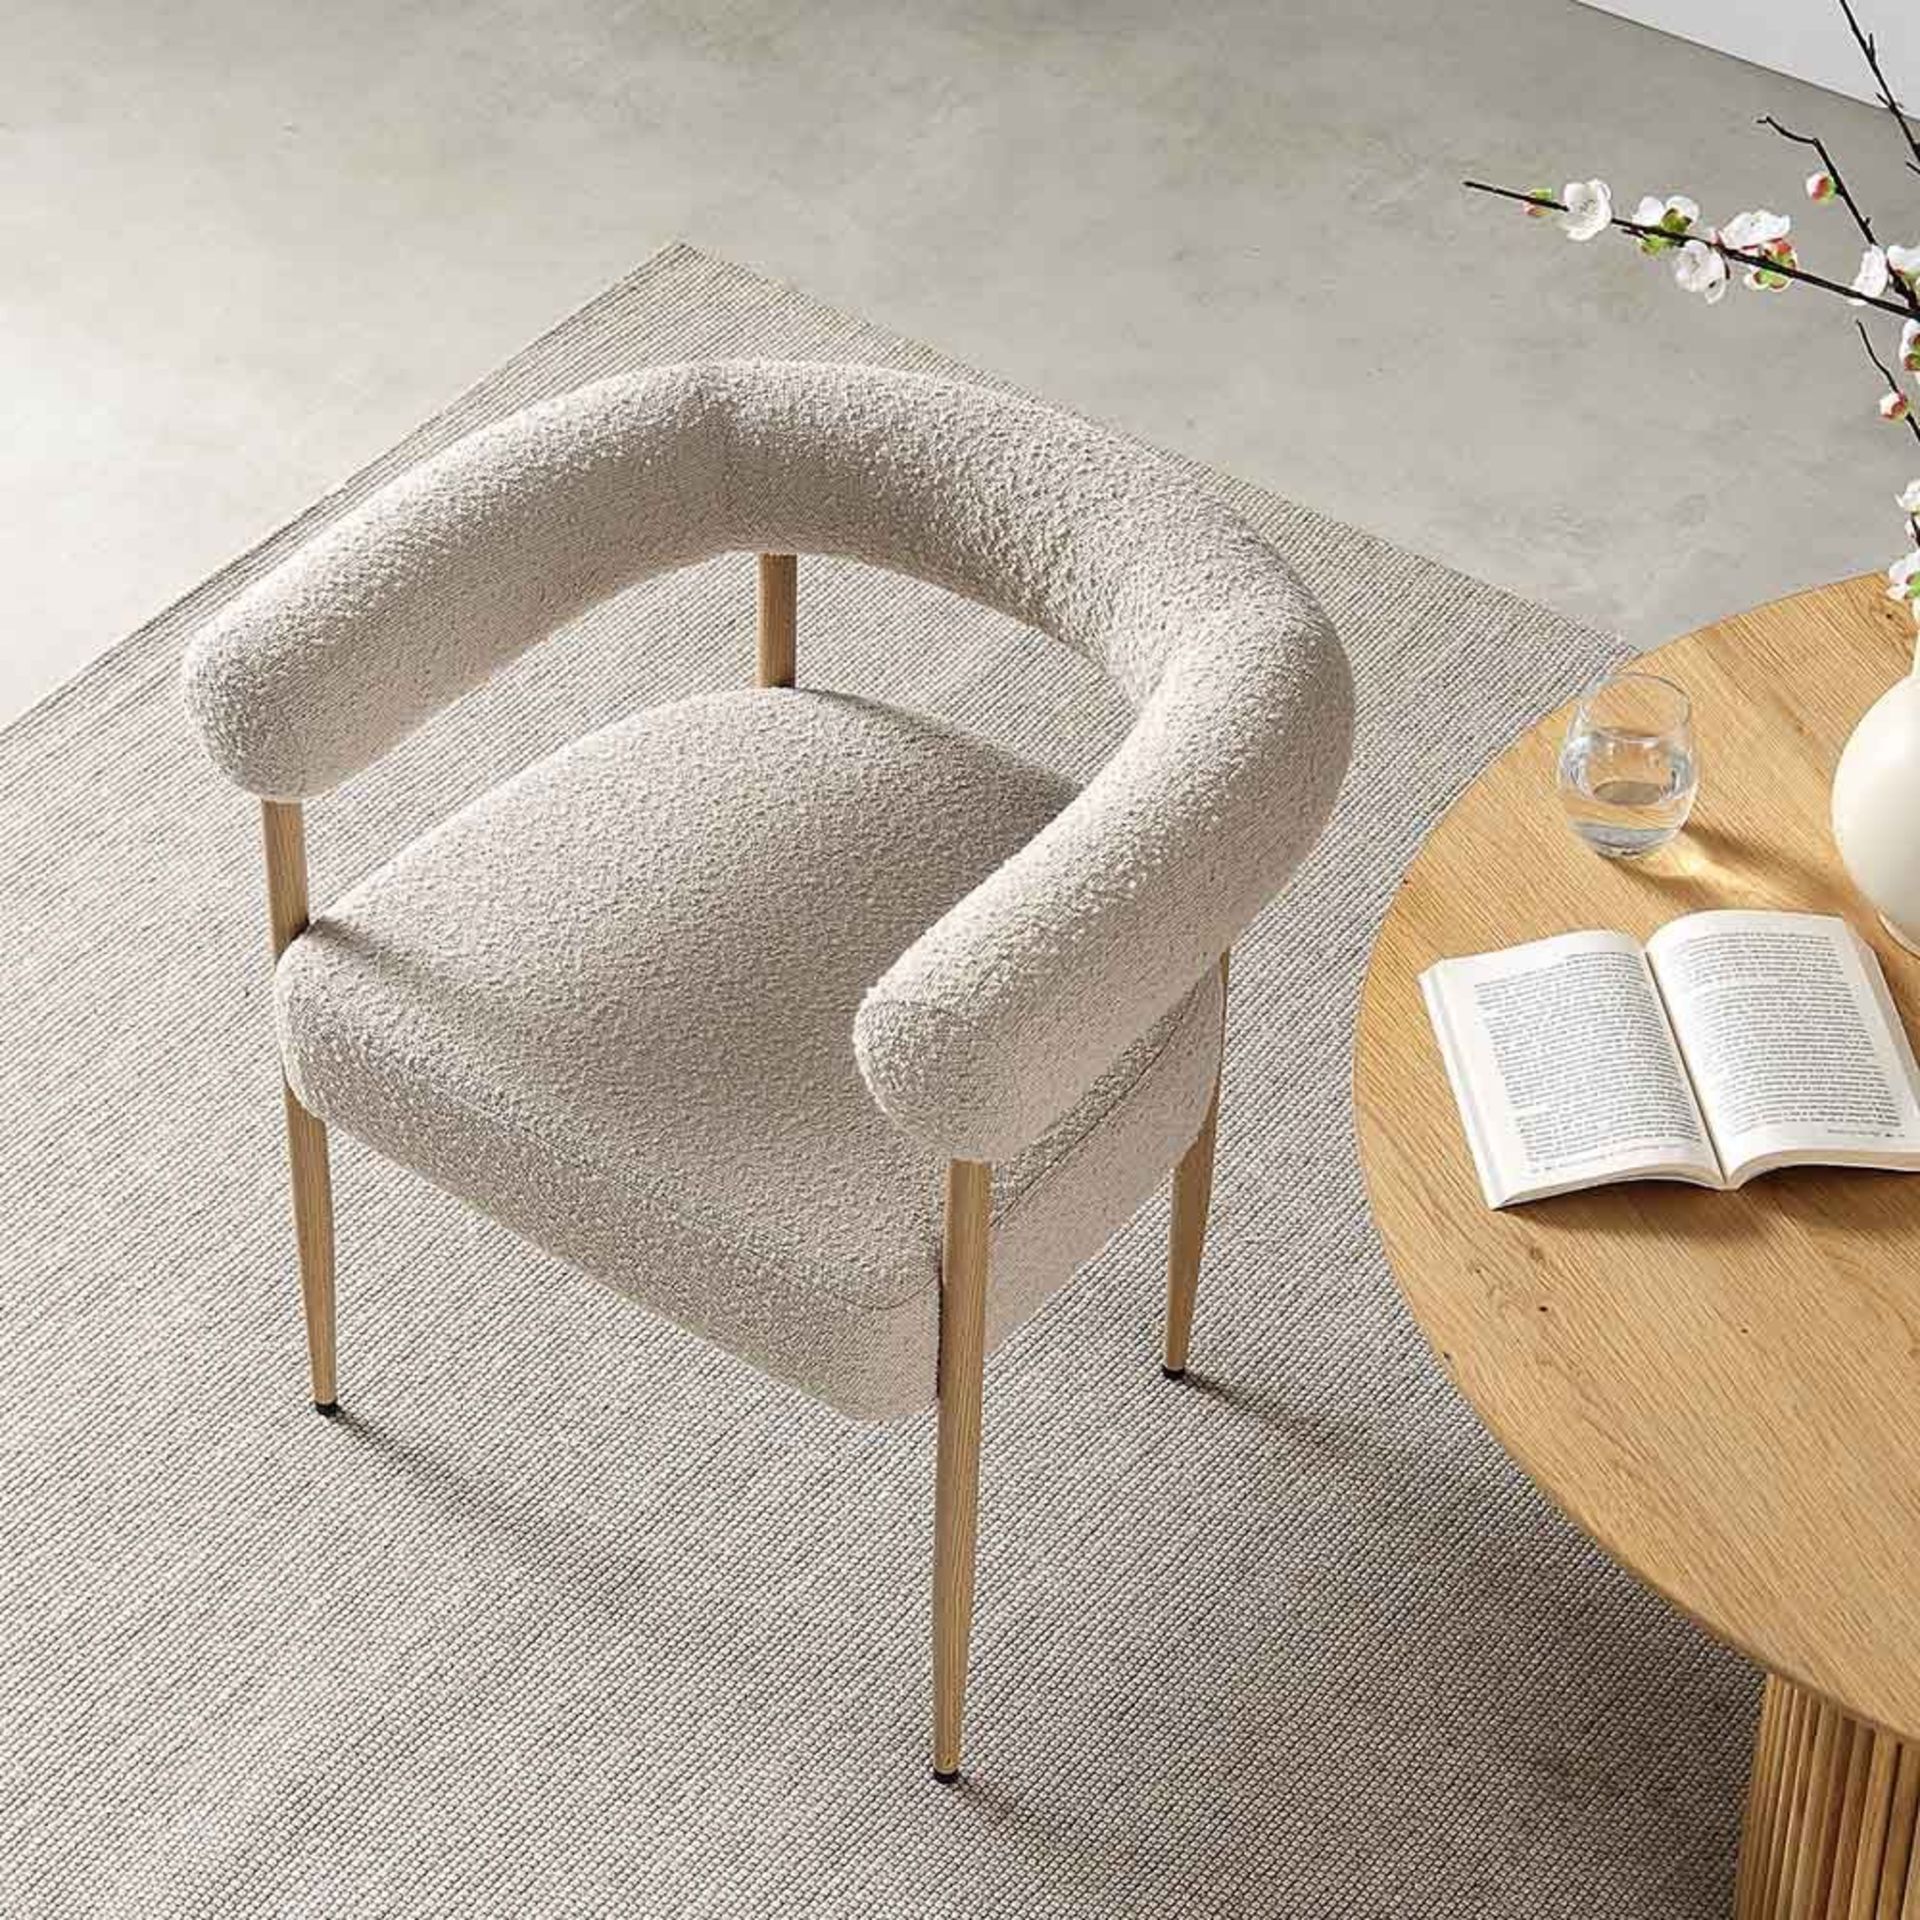 Fulbourn Taupe Boucle Dining Chair with Natural Wood Effect Legs. - R19.5. RRP £209.99. Well- - Image 2 of 2